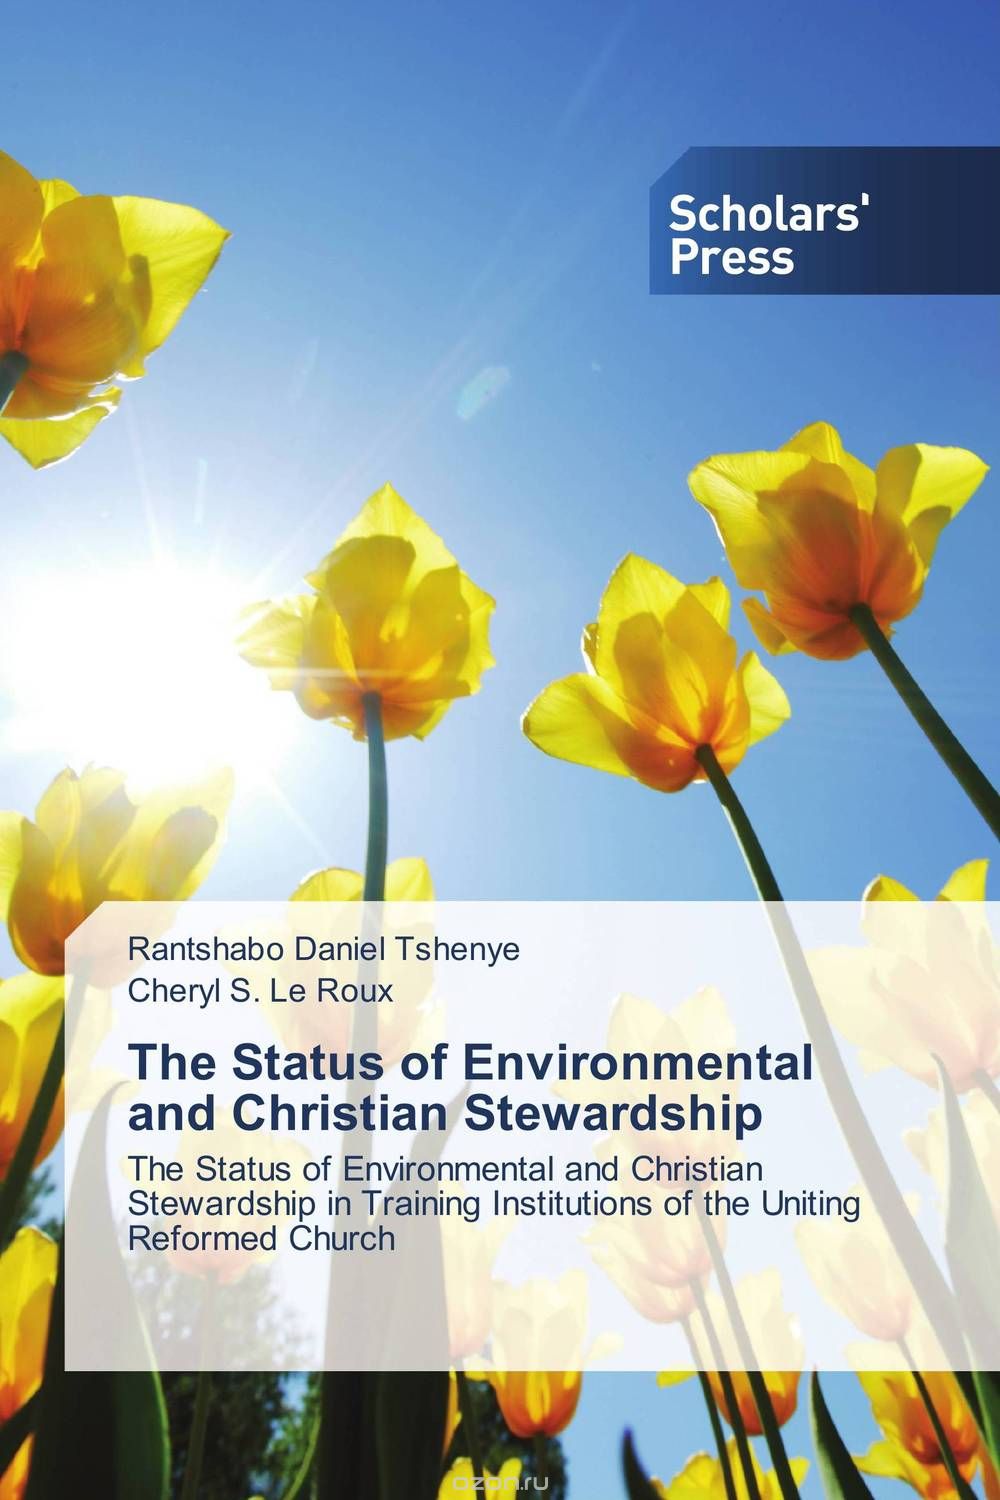 The Status of Environmental and Christian Stewardship